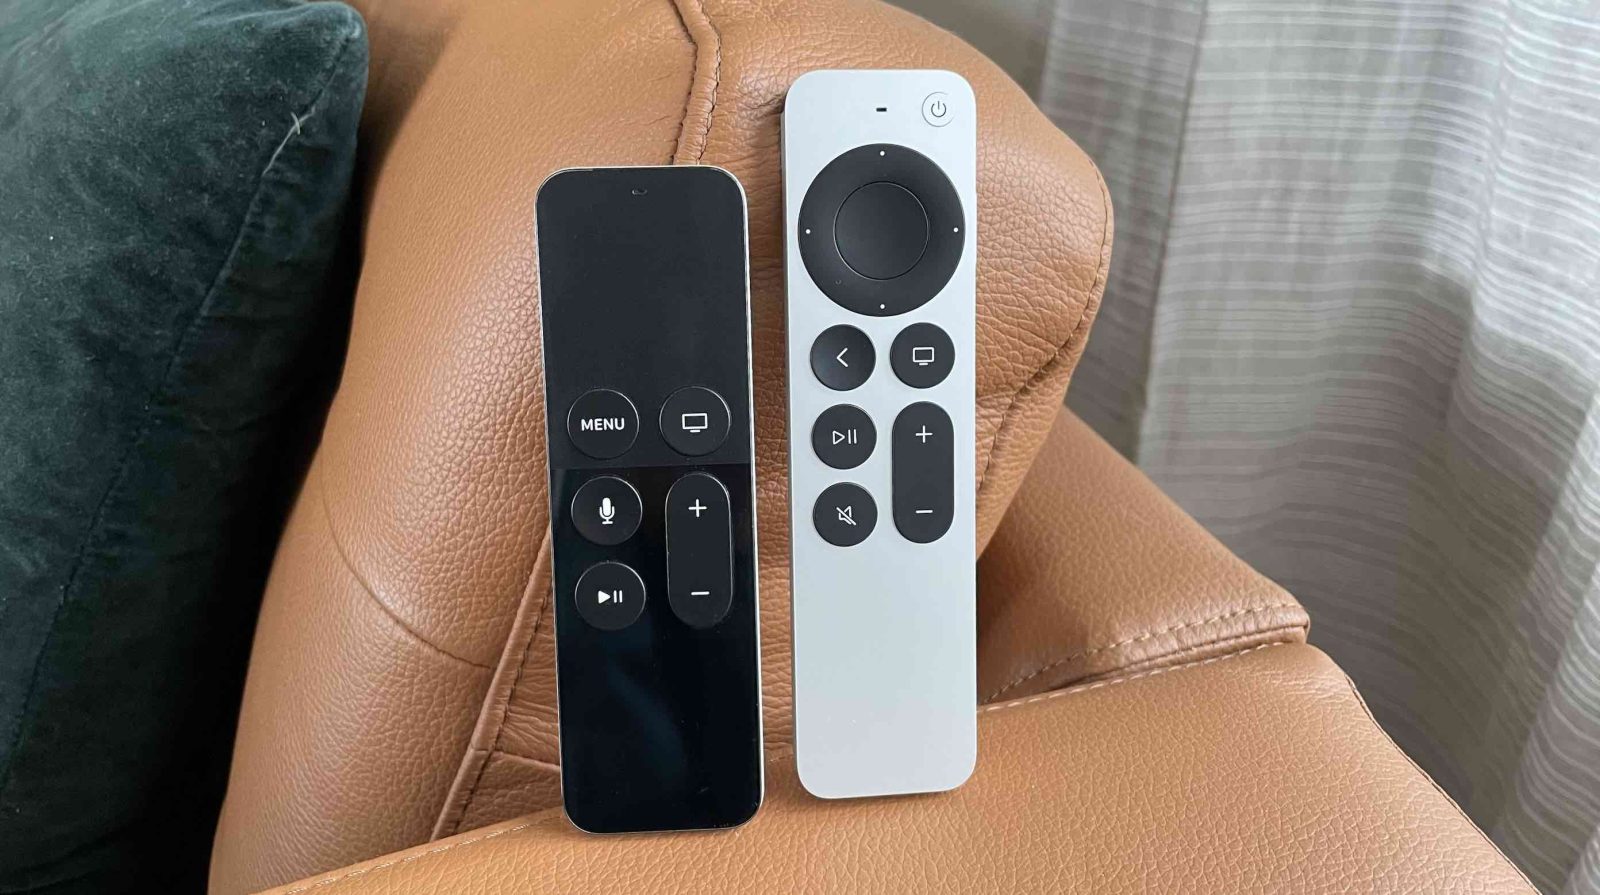 Apple TV Remote working? Here are 6 ways fix it - 9to5Mac